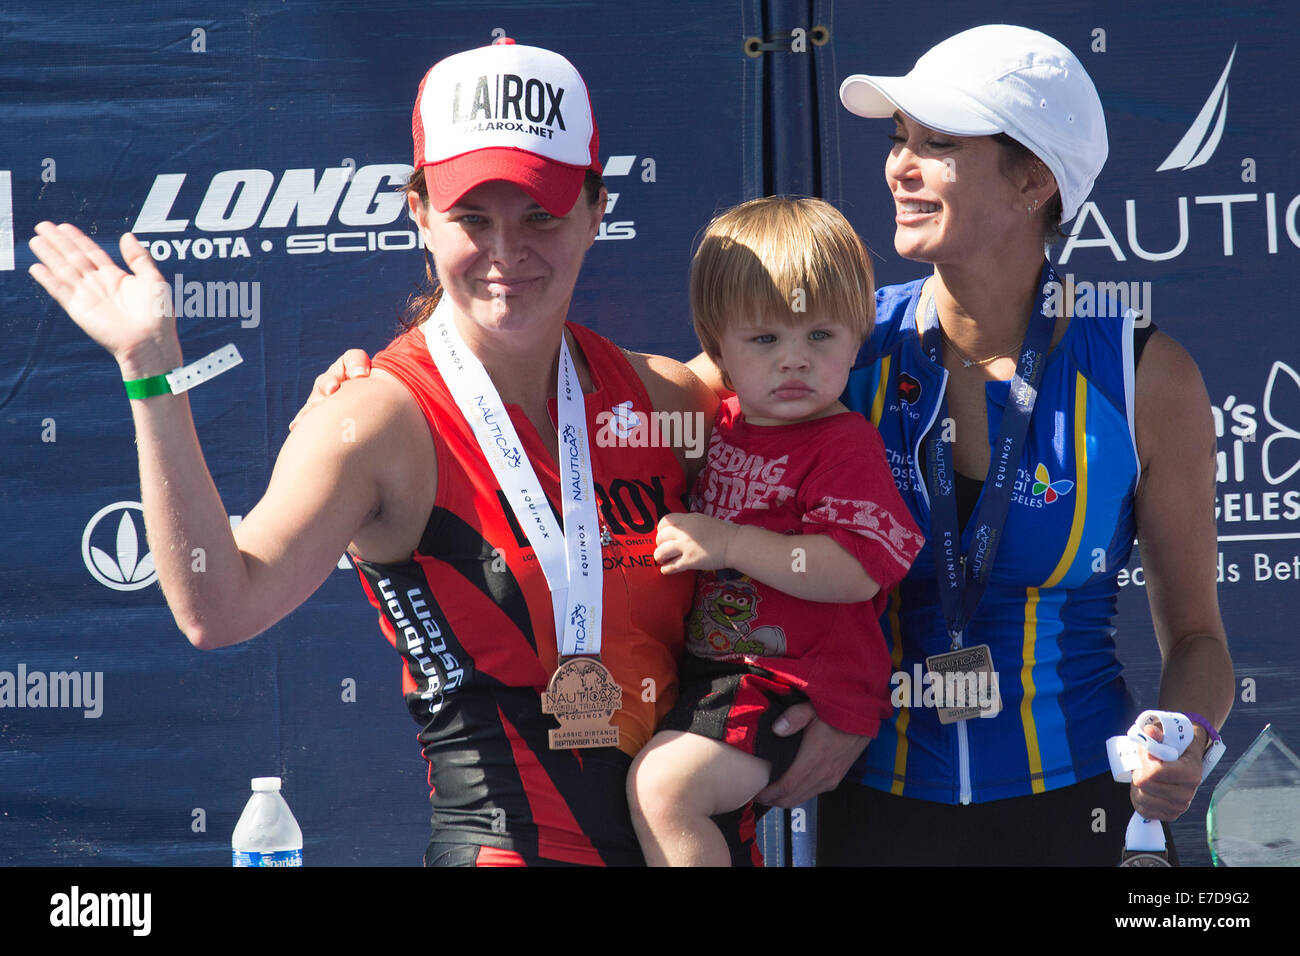 Malibu, California, USA. 14th Sep, 2014. Soap opera actress Heather Tom,  winner of the women's celebrity category, and her son Zane Alexander Achor  stand on the winner podium with second place finisher